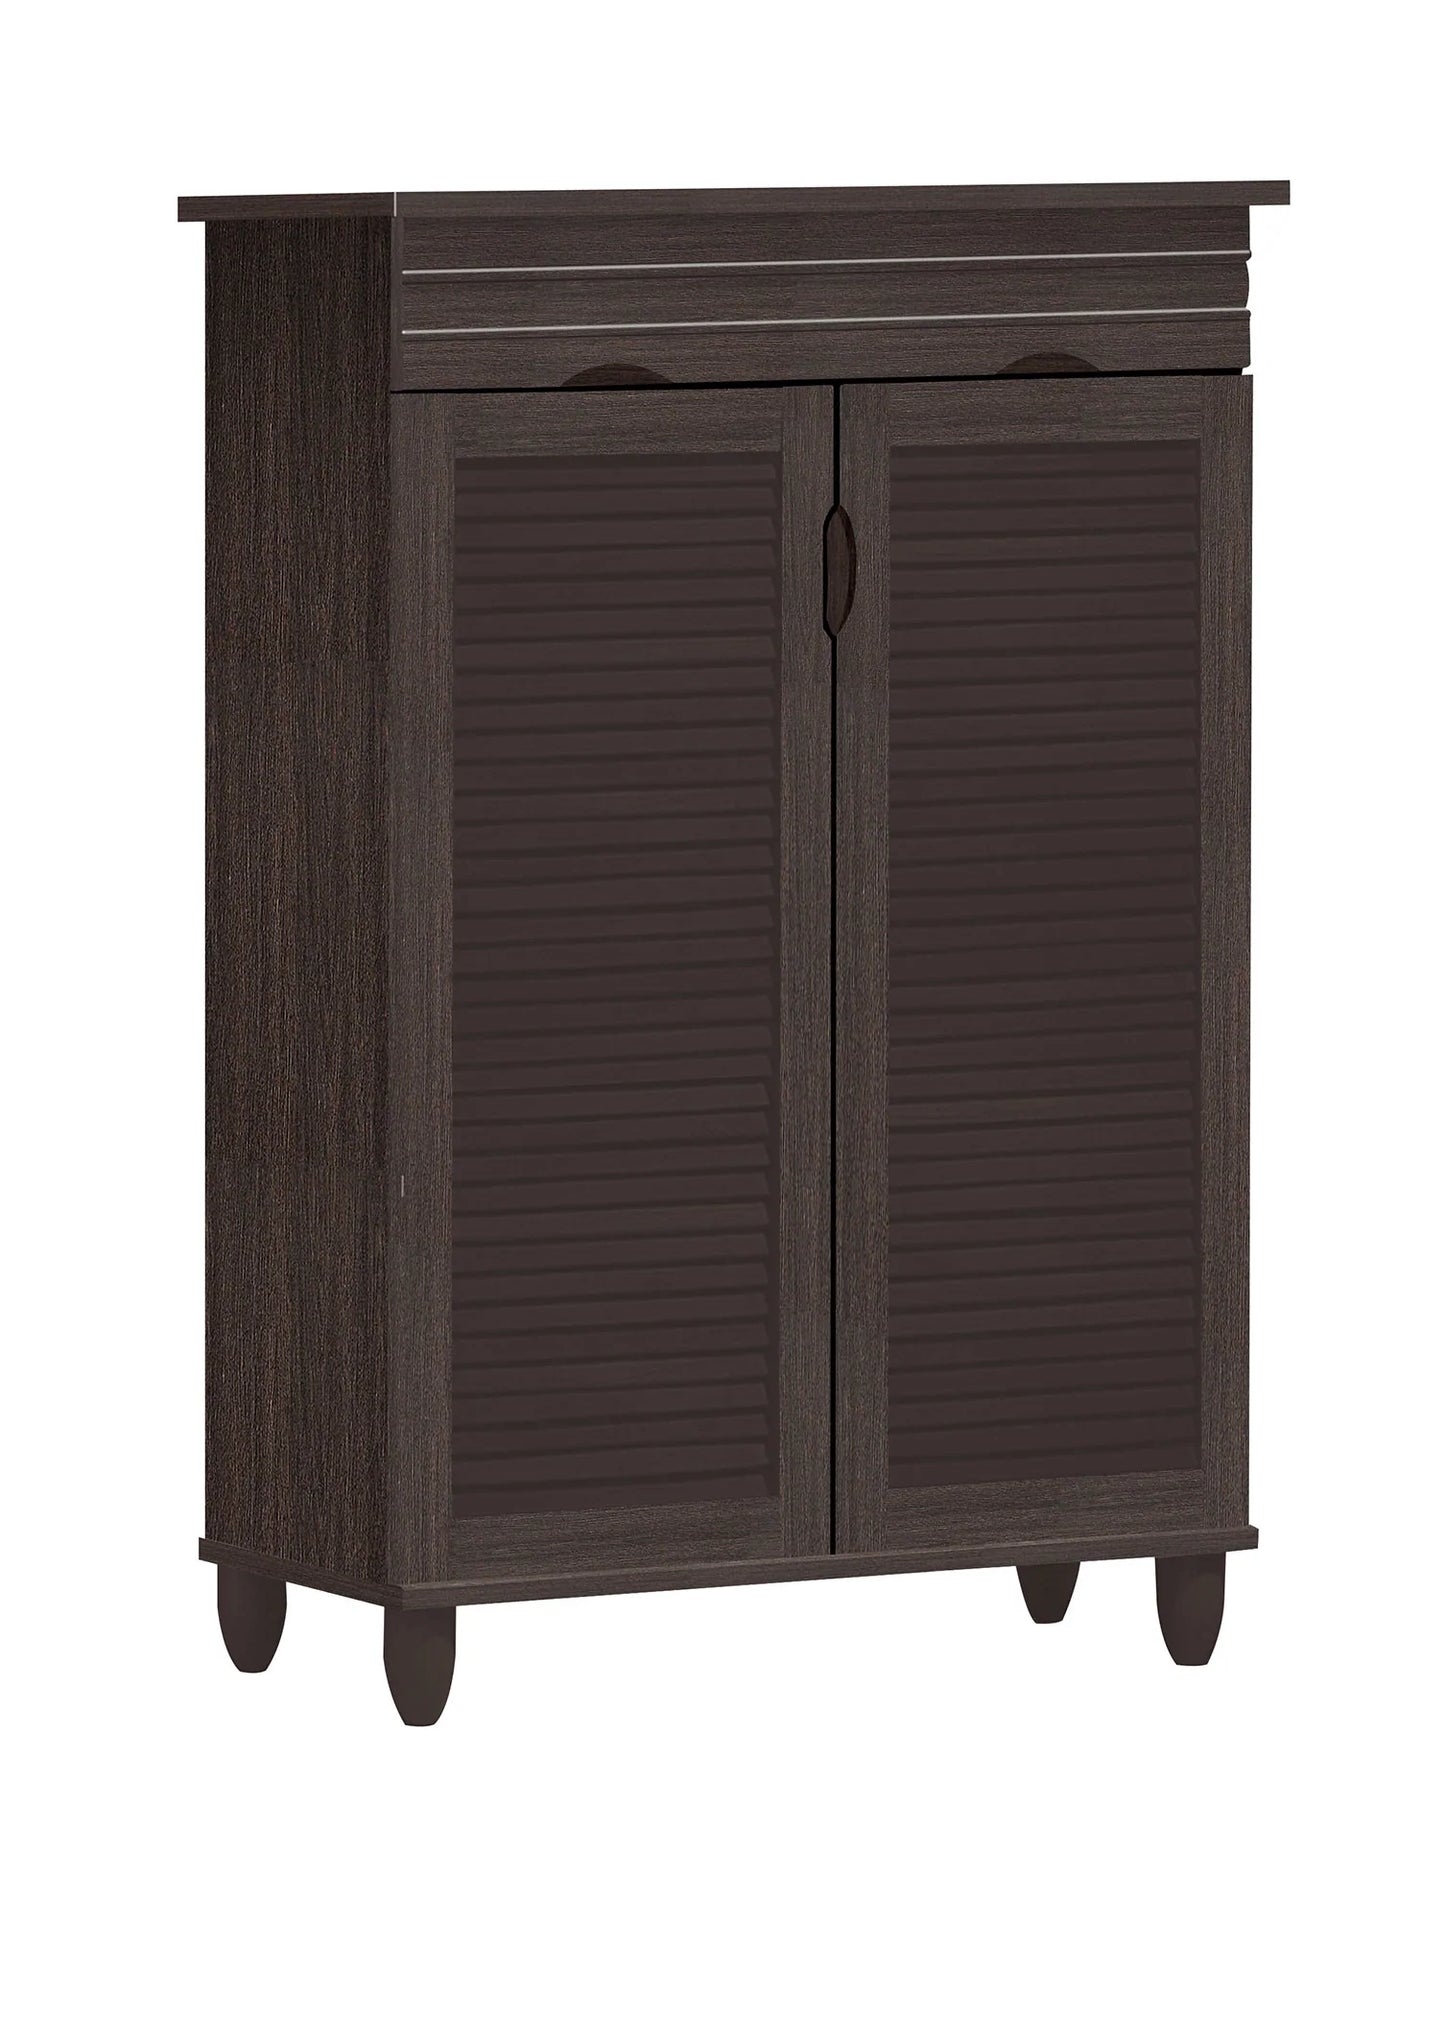 Shoe Cabinet Drawer & 4 Shelves Comes in Espresso or Natural Finish